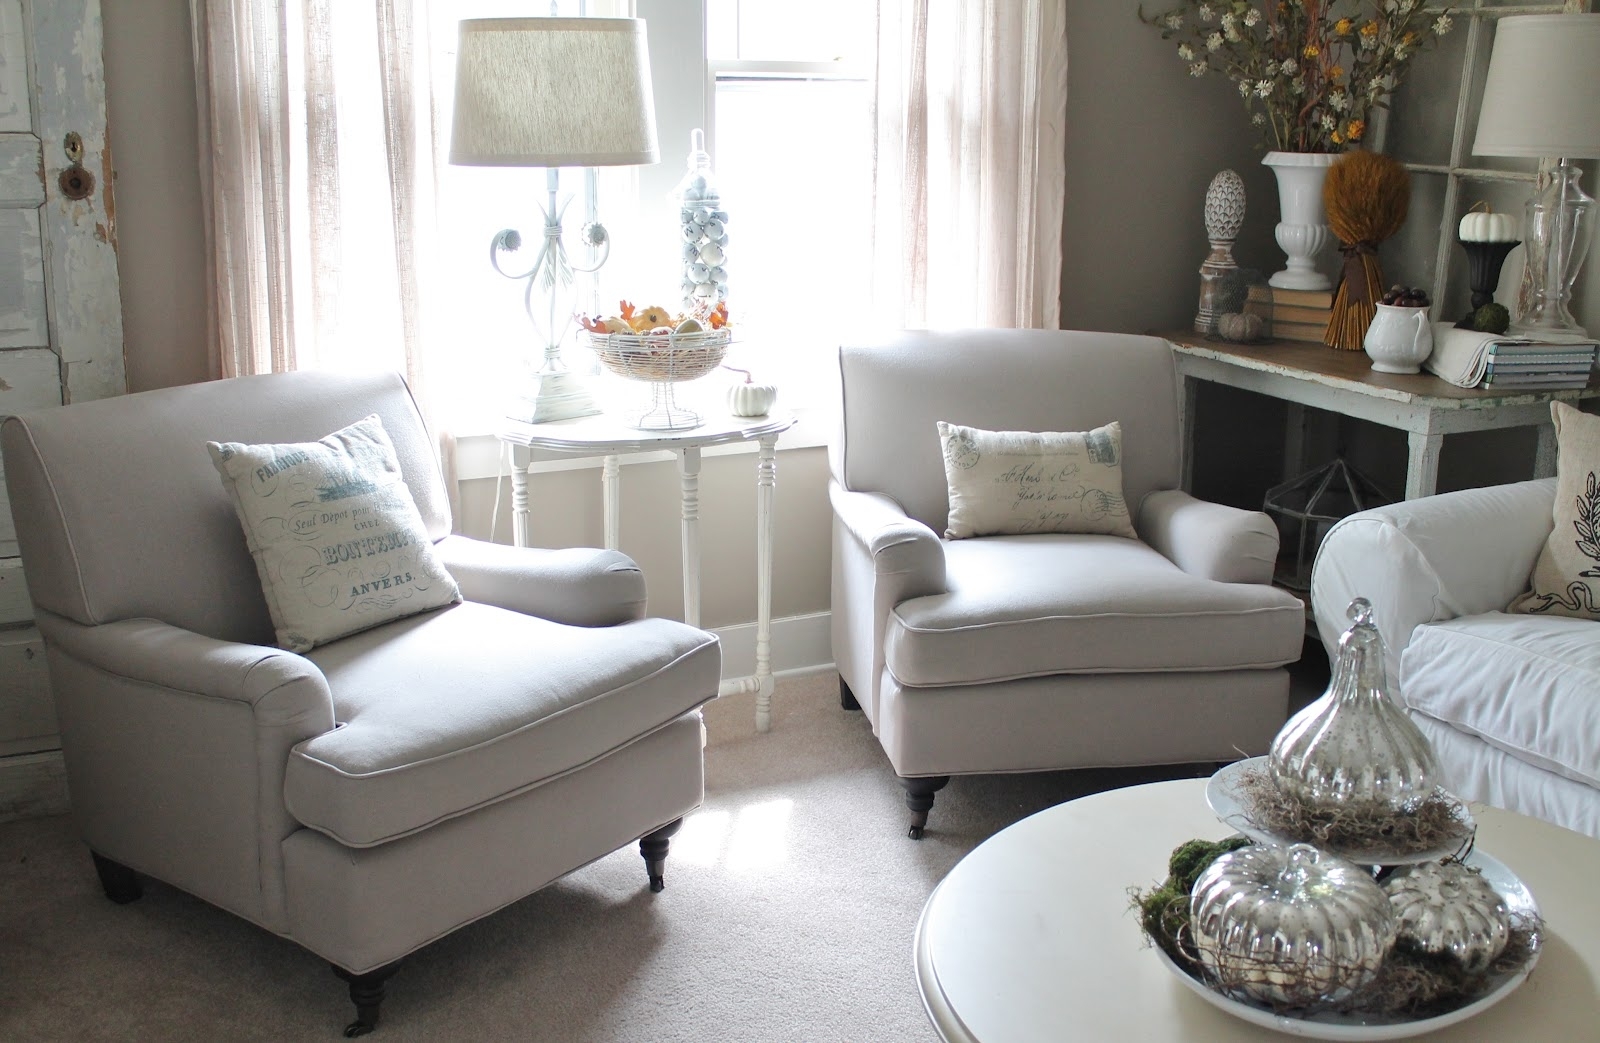 The Creative Large Living Room Chair Trend